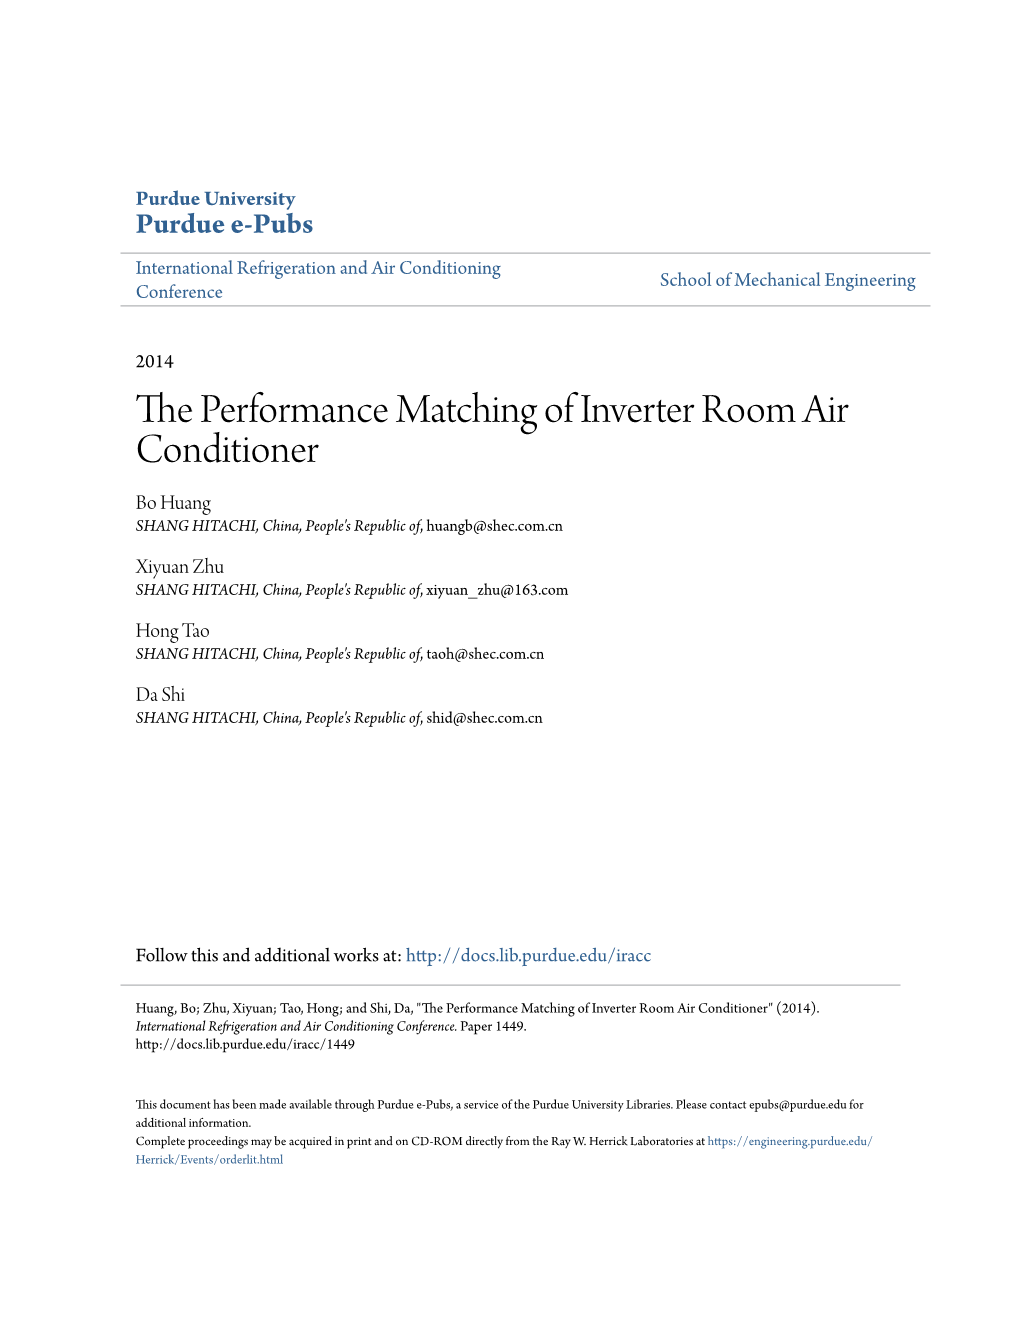 The Performance Matching of Inverter Room Air Conditioner